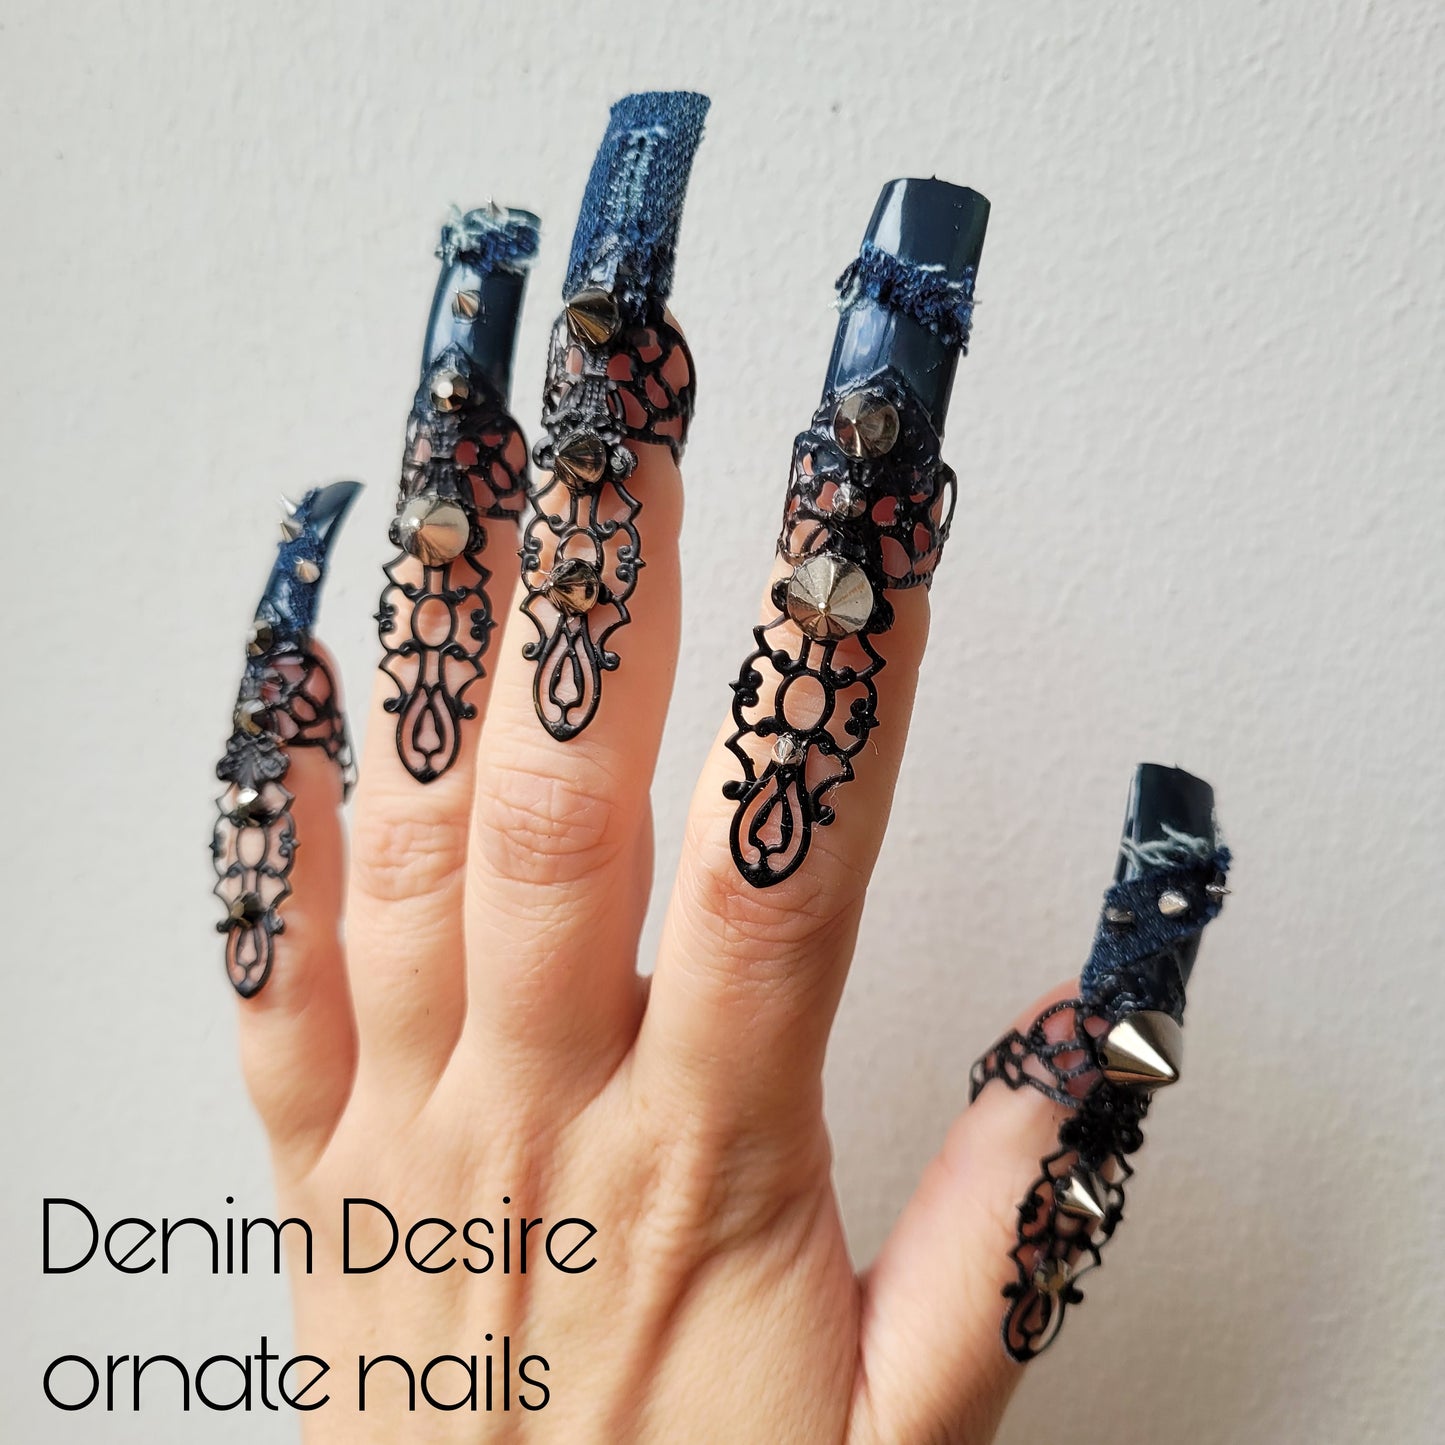 Made-to-order: the Denim Desire ornate nails